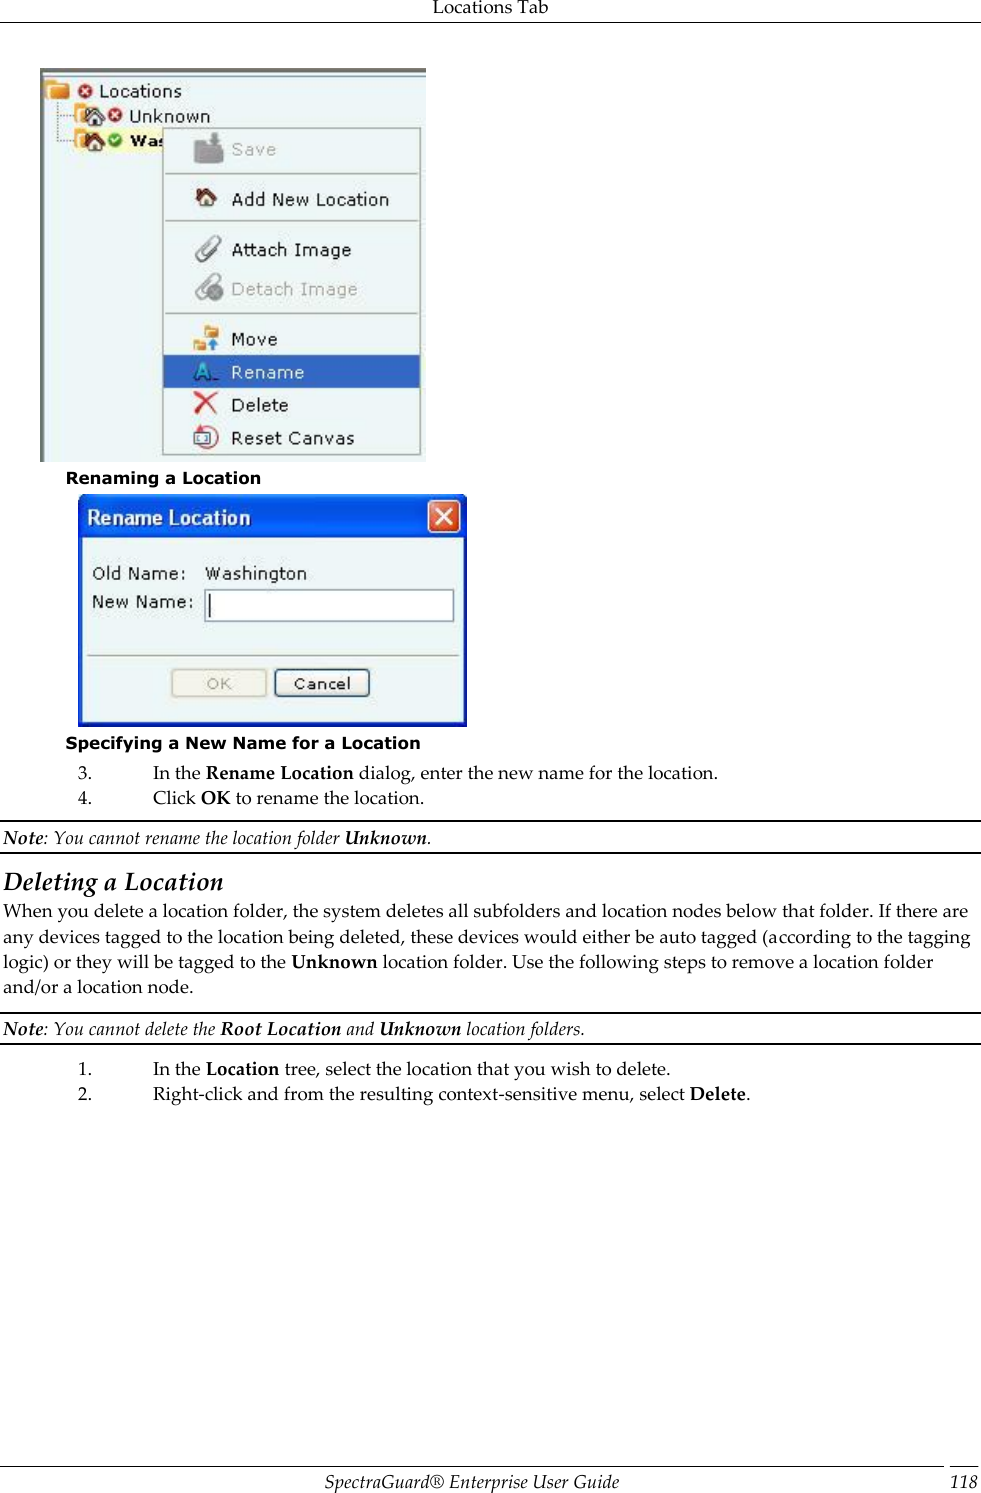 Locations Tab SpectraGuard®  Enterprise User Guide 118  Renaming a Location  Specifying a New Name for a Location 3. In the Rename Location dialog, enter the new name for the location. 4. Click OK to rename the location. Note: You cannot rename the location folder Unknown. Deleting a Location When you delete a location folder, the system deletes all subfolders and location nodes below that folder. If there are any devices tagged to the location being deleted, these devices would either be auto tagged (according to the tagging logic) or they will be tagged to the Unknown location folder. Use the following steps to remove a location folder and/or a location node. Note: You cannot delete the Root Location and Unknown location folders. 1. In the Location tree, select the location that you wish to delete. 2. Right-click and from the resulting context-sensitive menu, select Delete.   